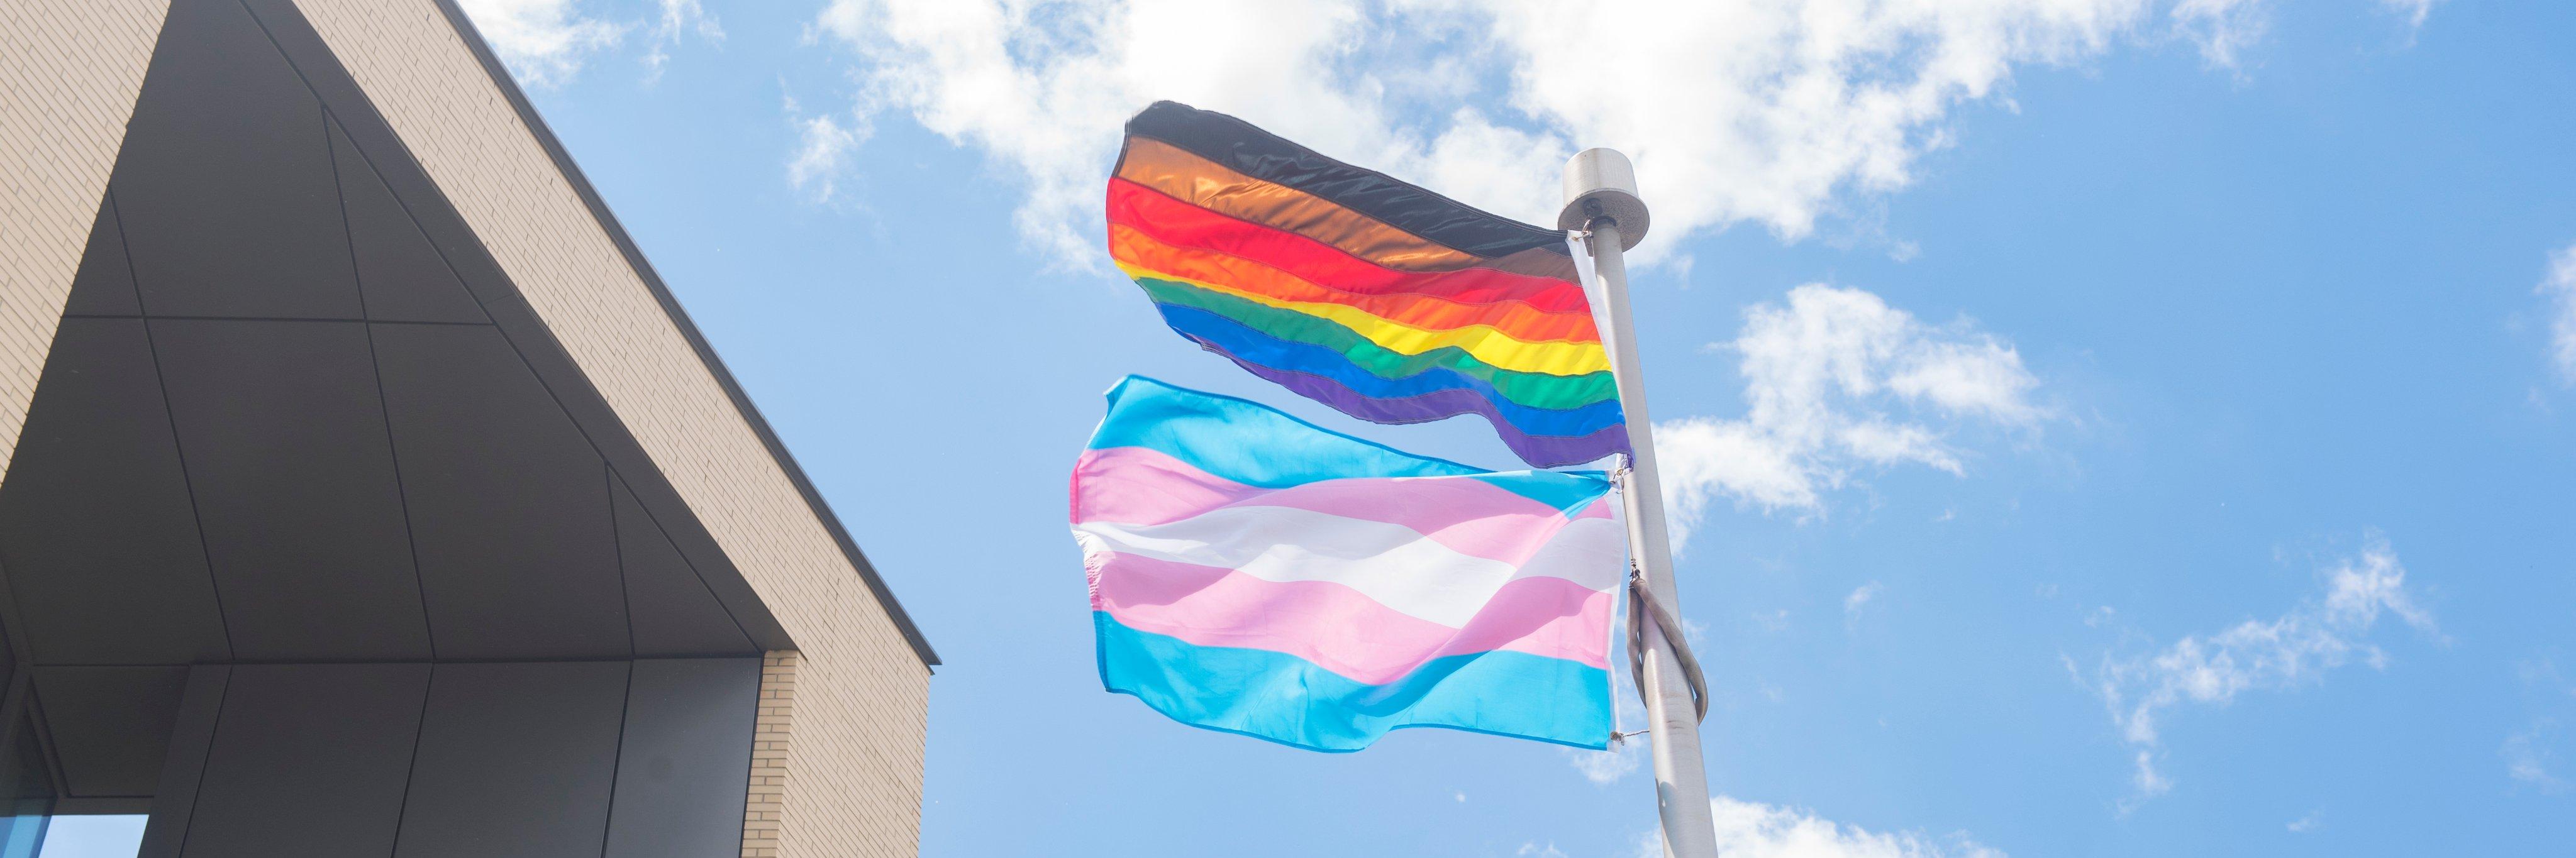 The ‘More Colour; More Pride’ flag, includes the addition of a brown and black stripe, highlighting the inclusion of queer, trans, Black, Indigenous and people of colour.